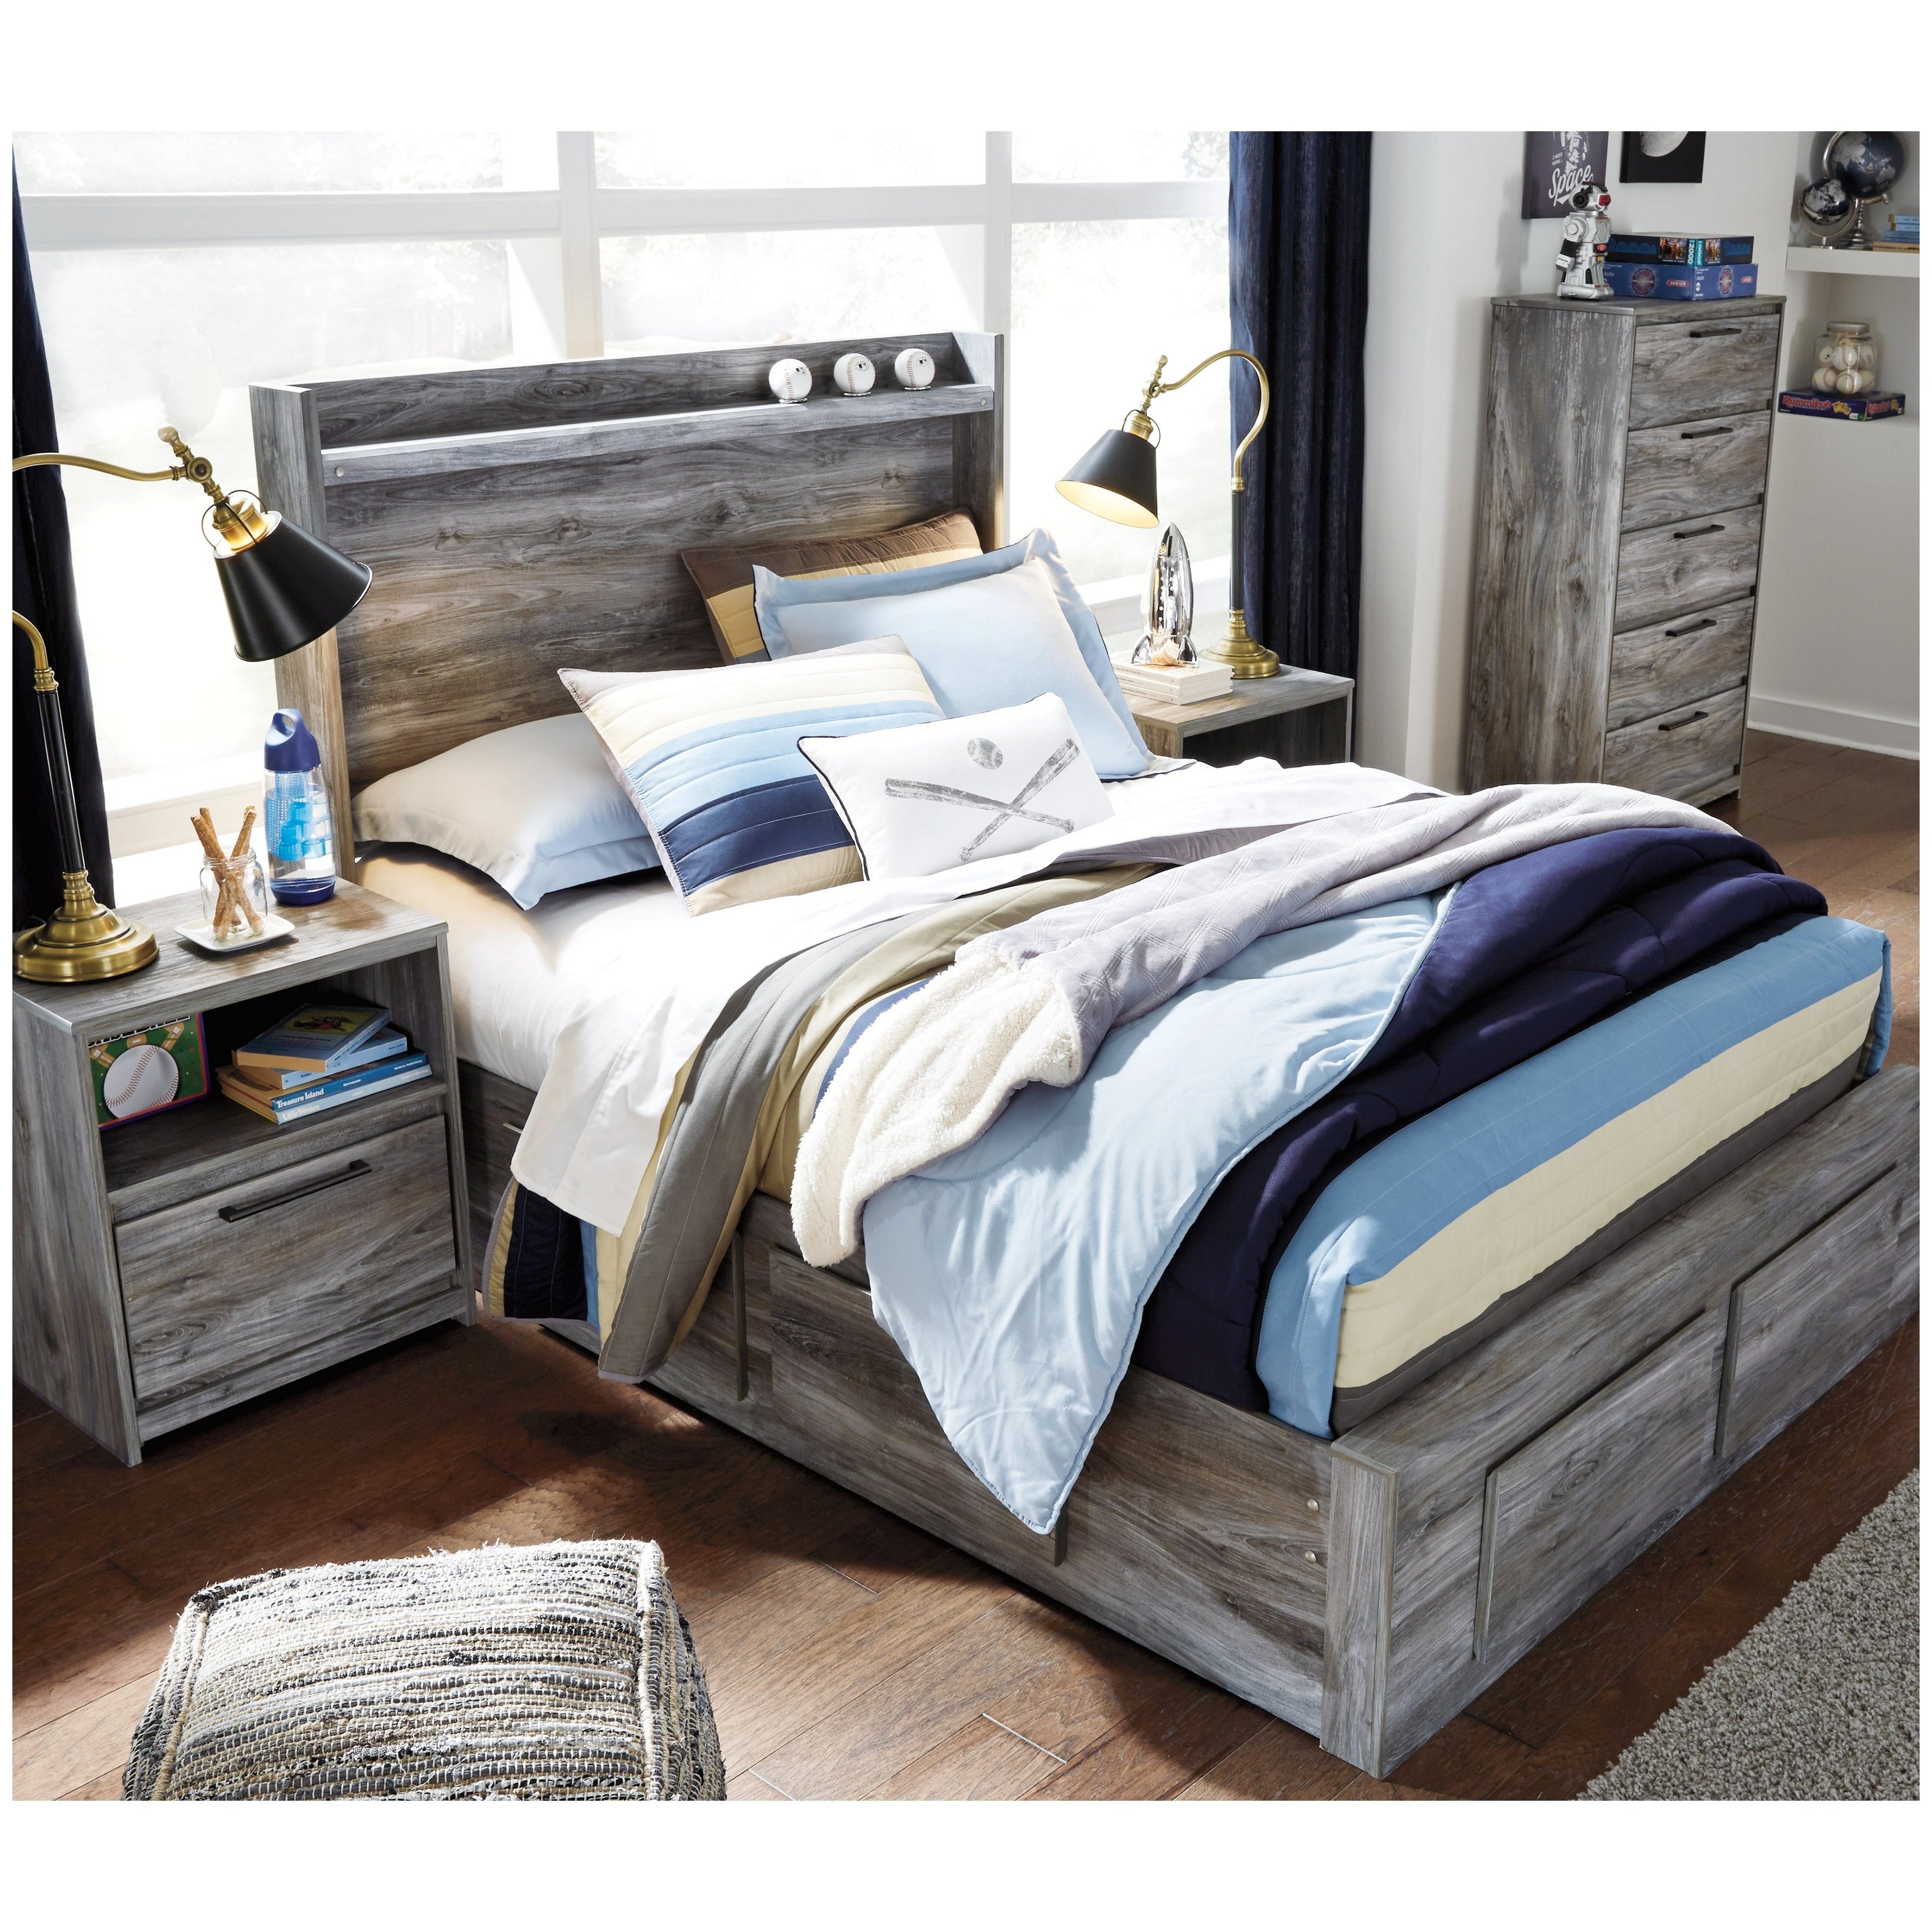 Baystorm Panel Bed with 4 Storage Drawers